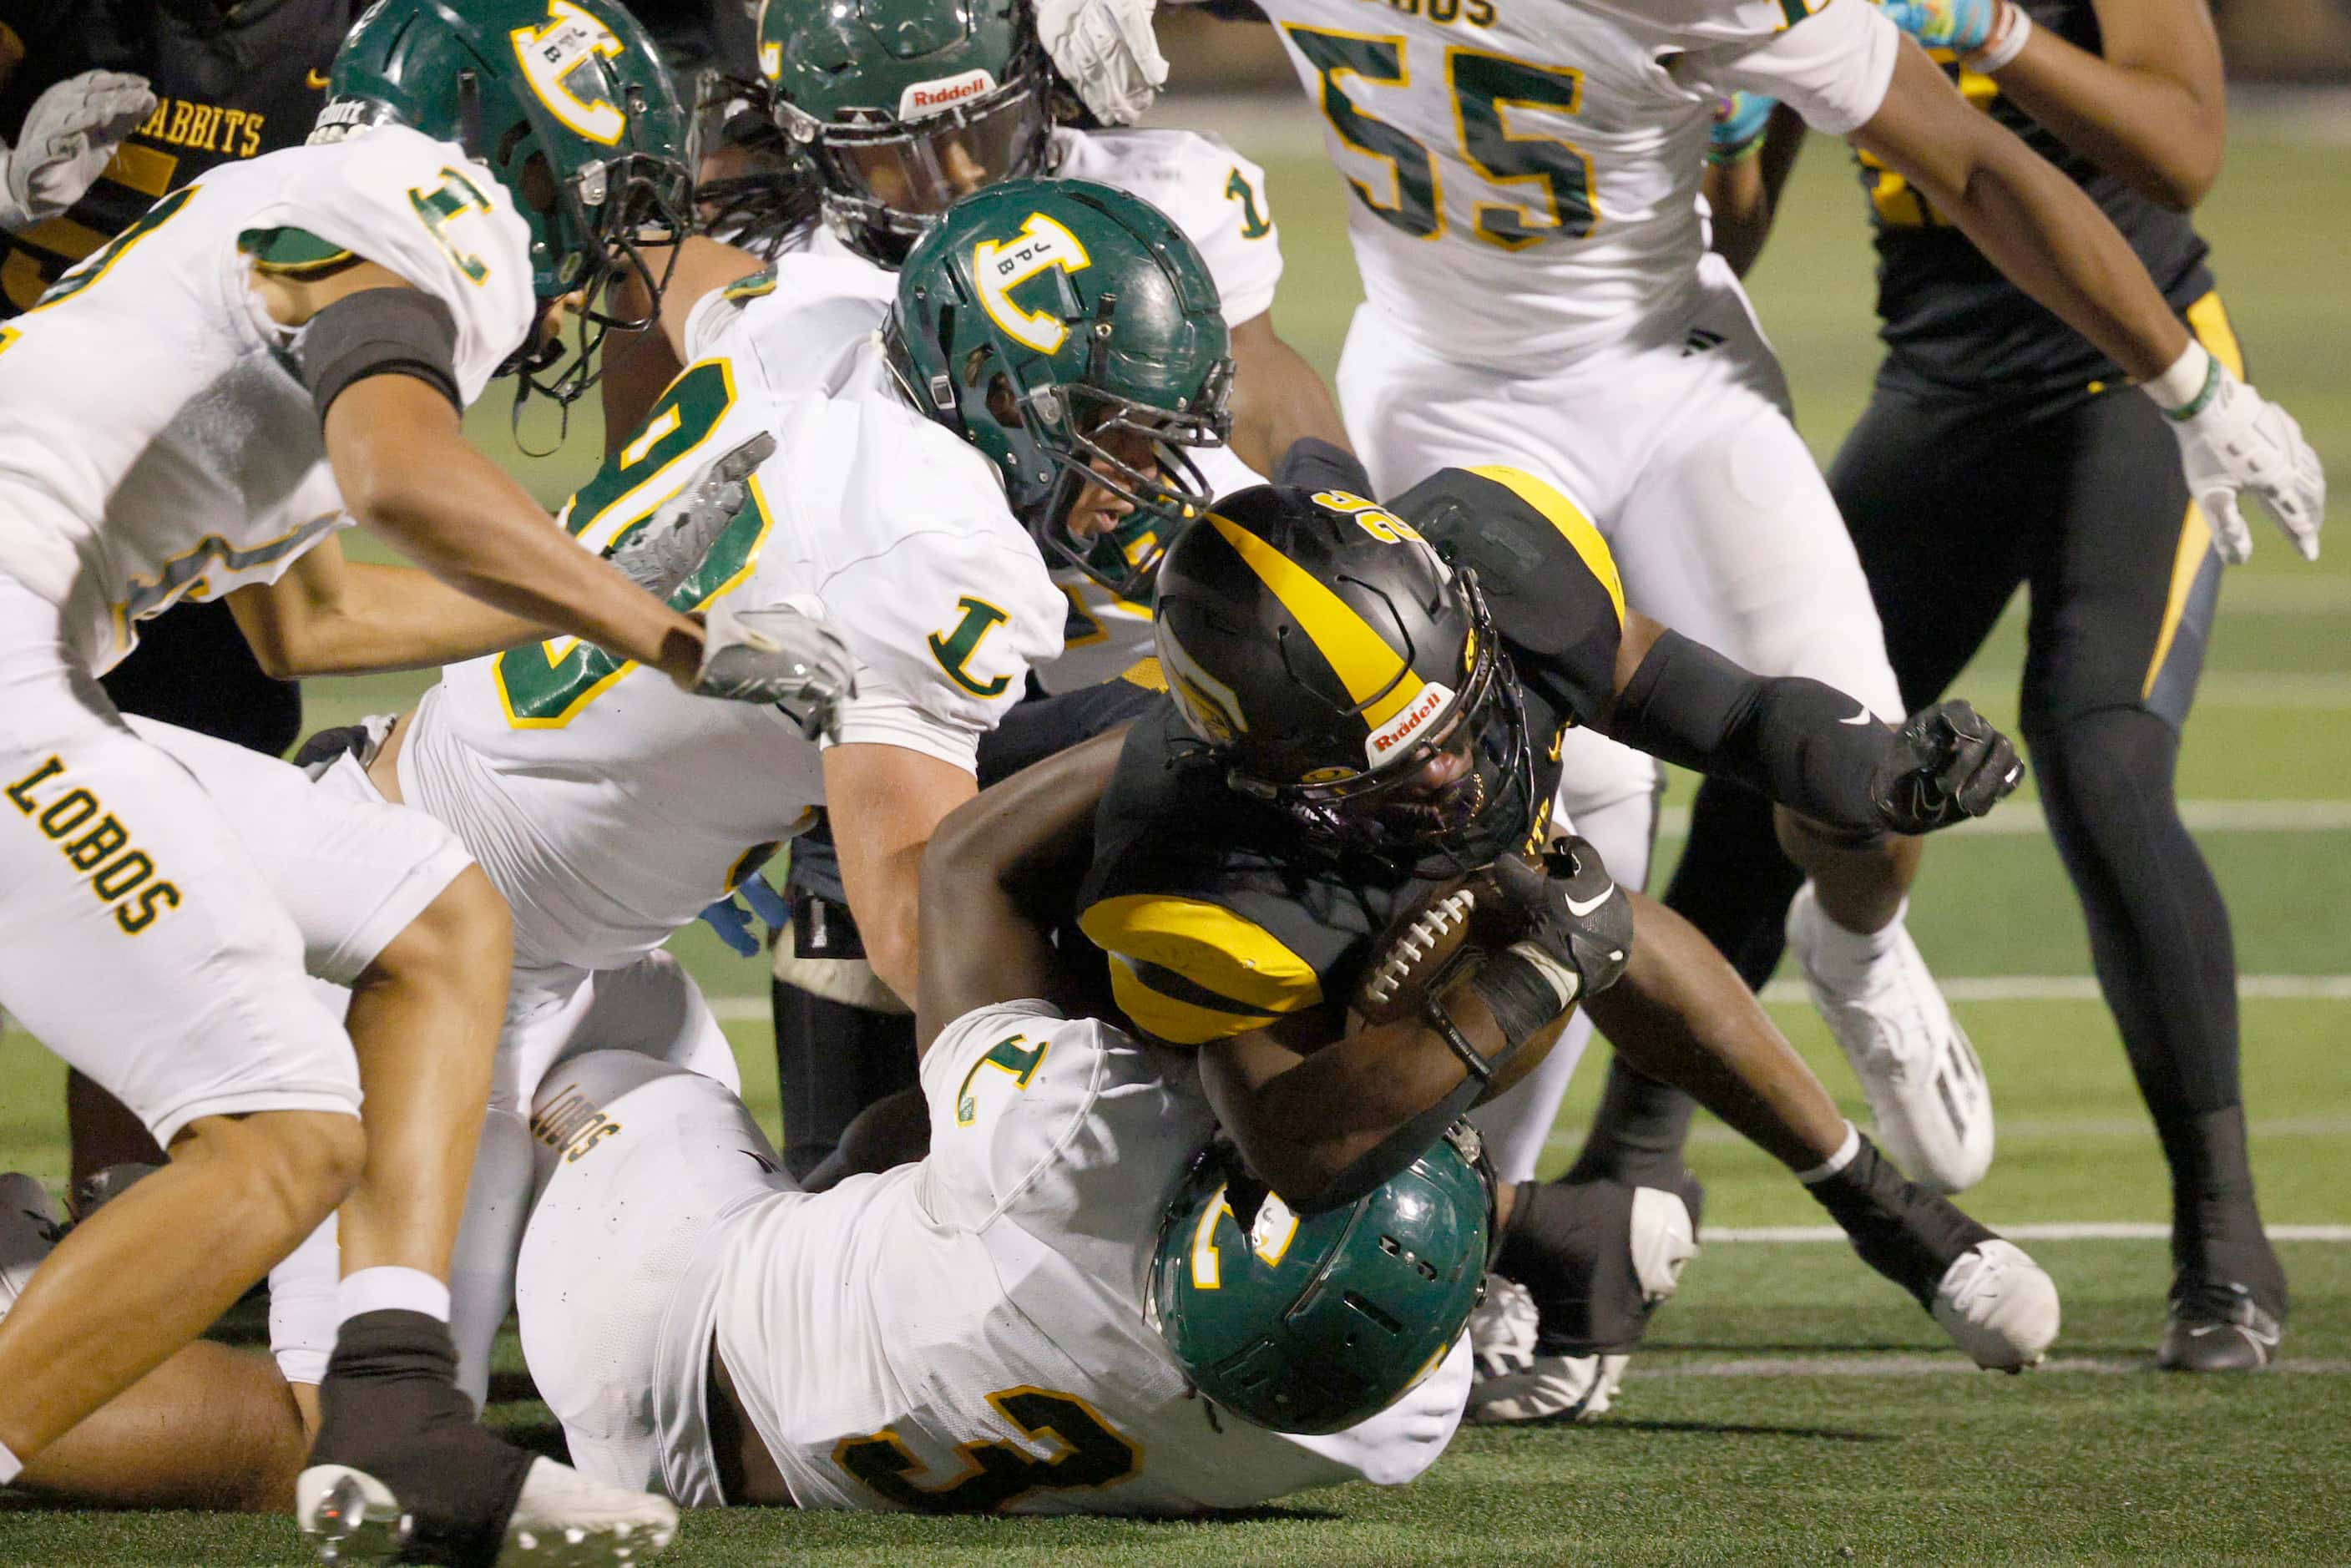 Longview’s defense players go to stop Forney's Javian Osborne (26) during the second half of...